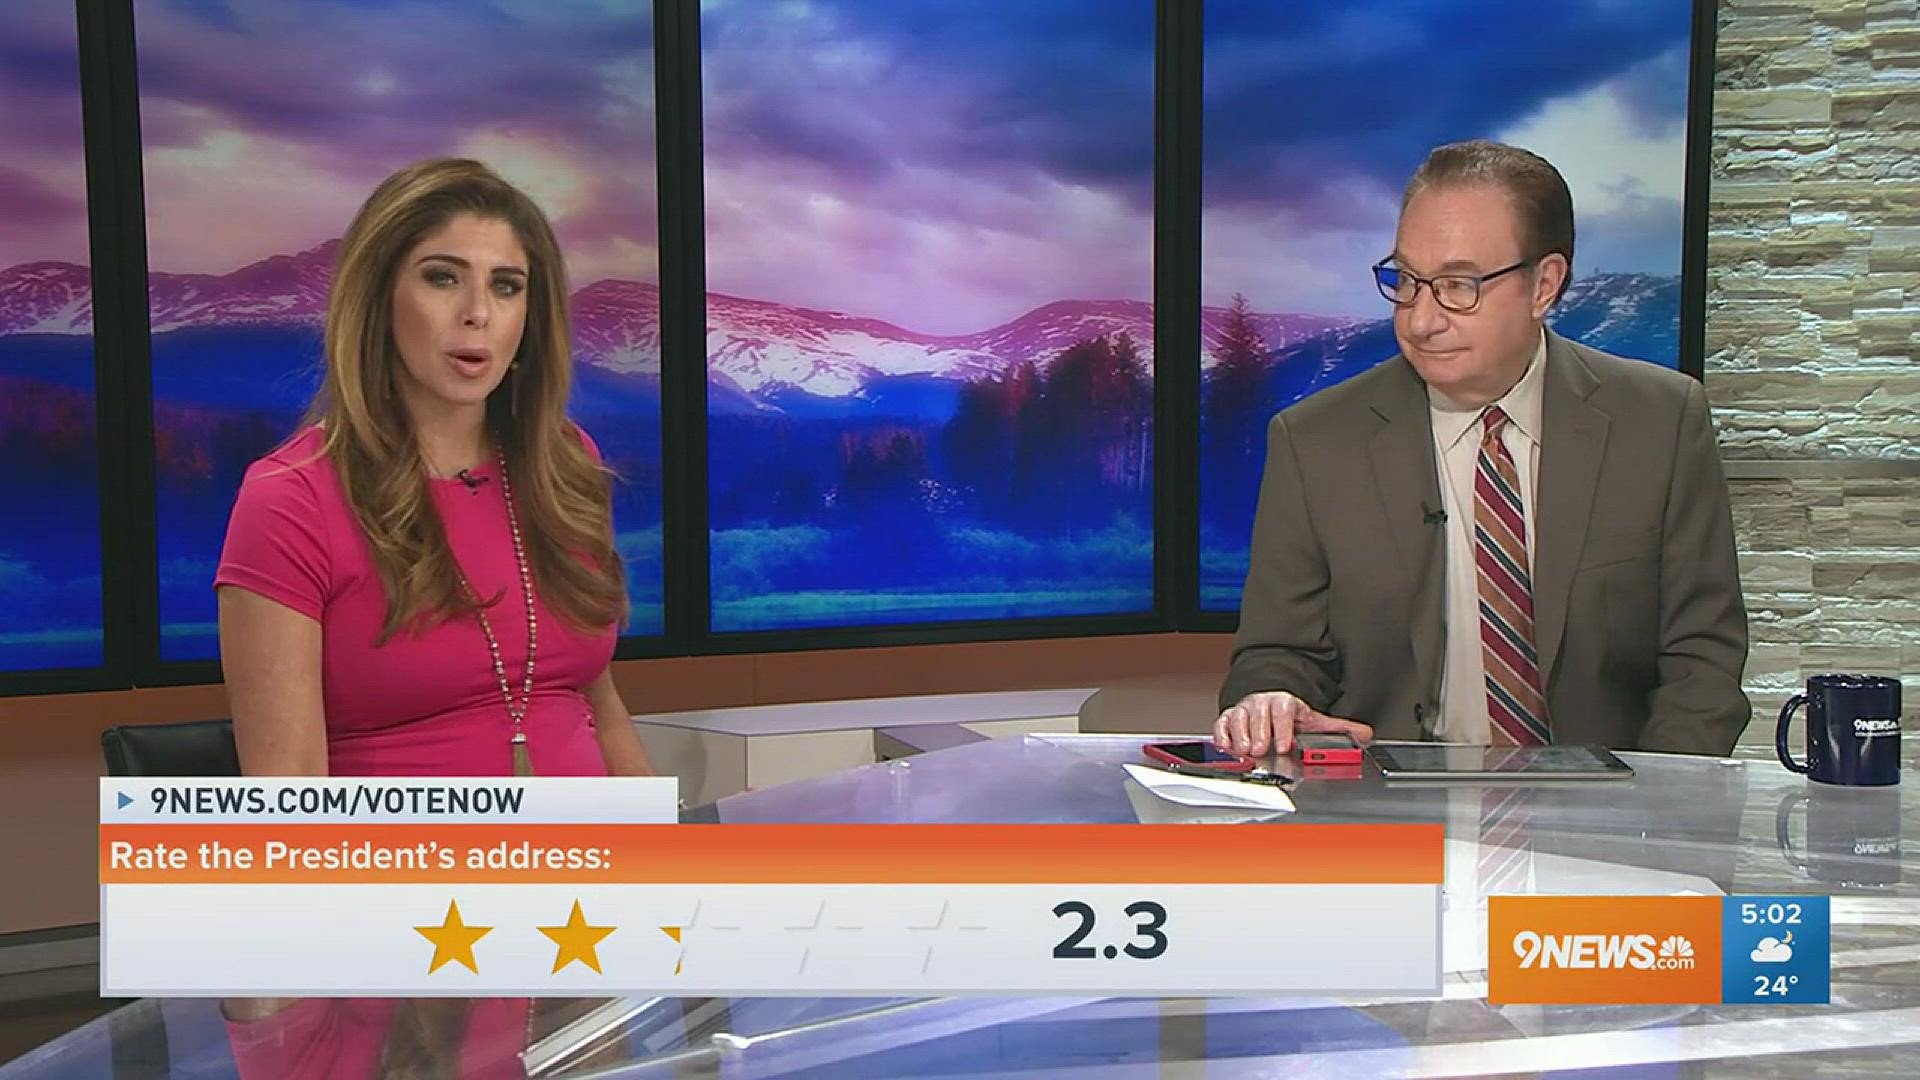 The 9news morning team tries to determine a rating for last night's presidential address.